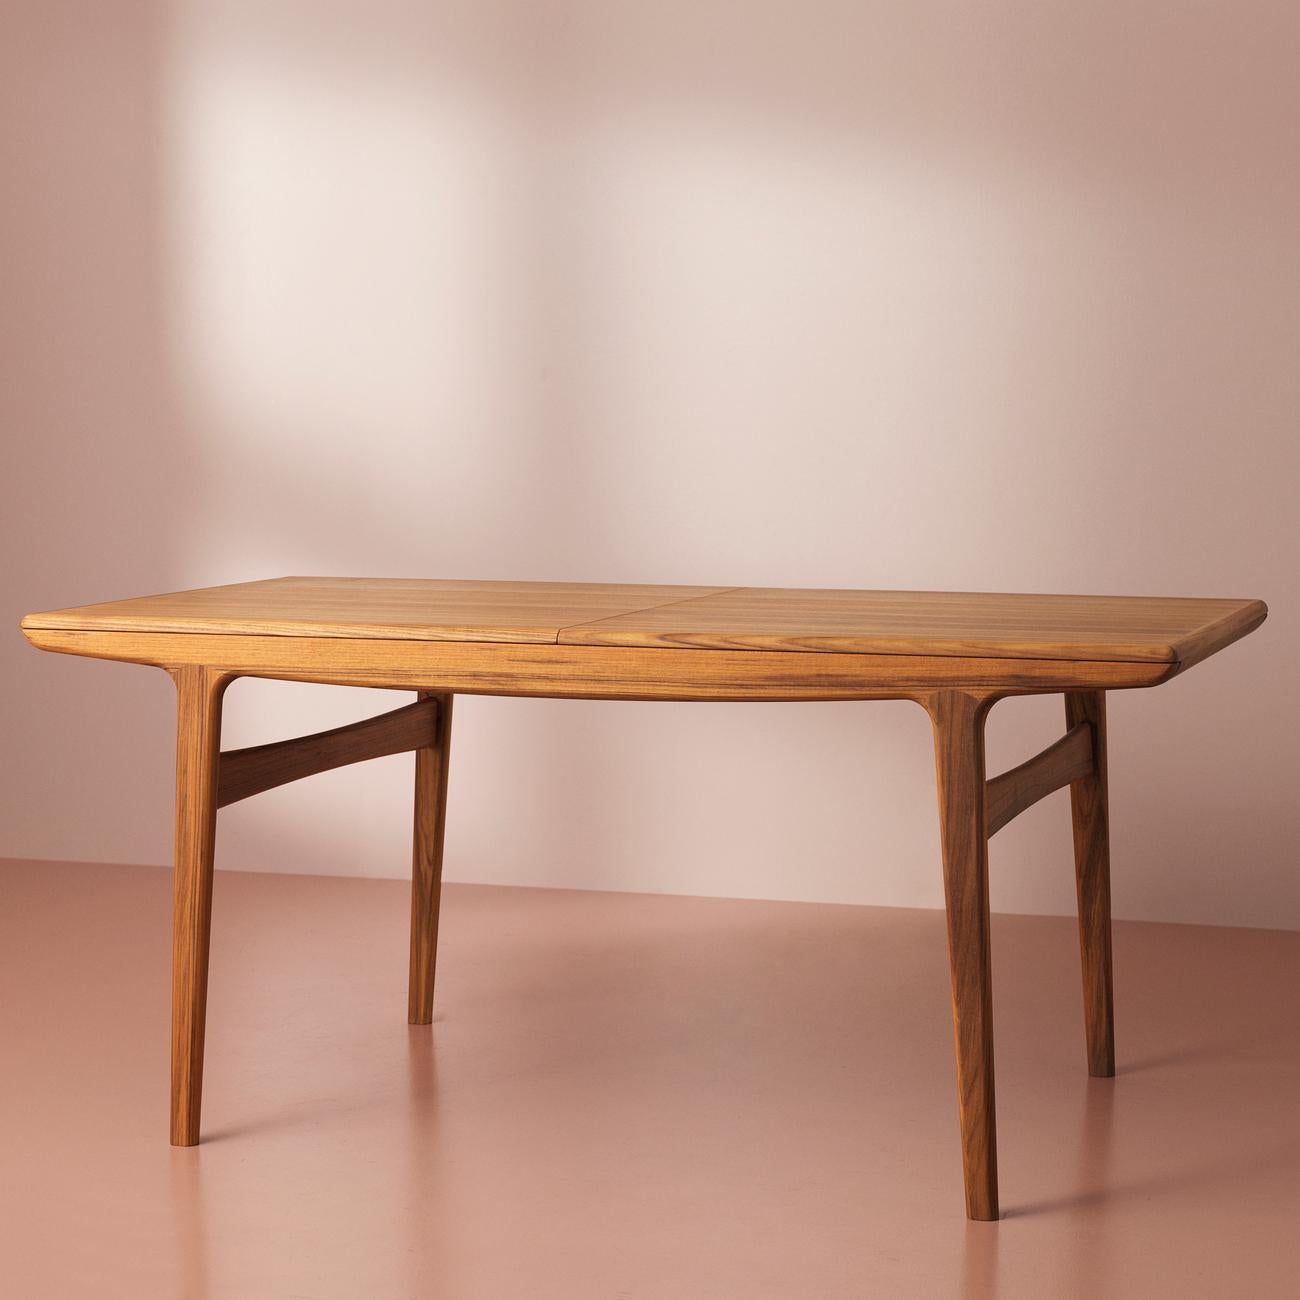 Danish Evermore Dining Table Teak 160 by Warm Nordic